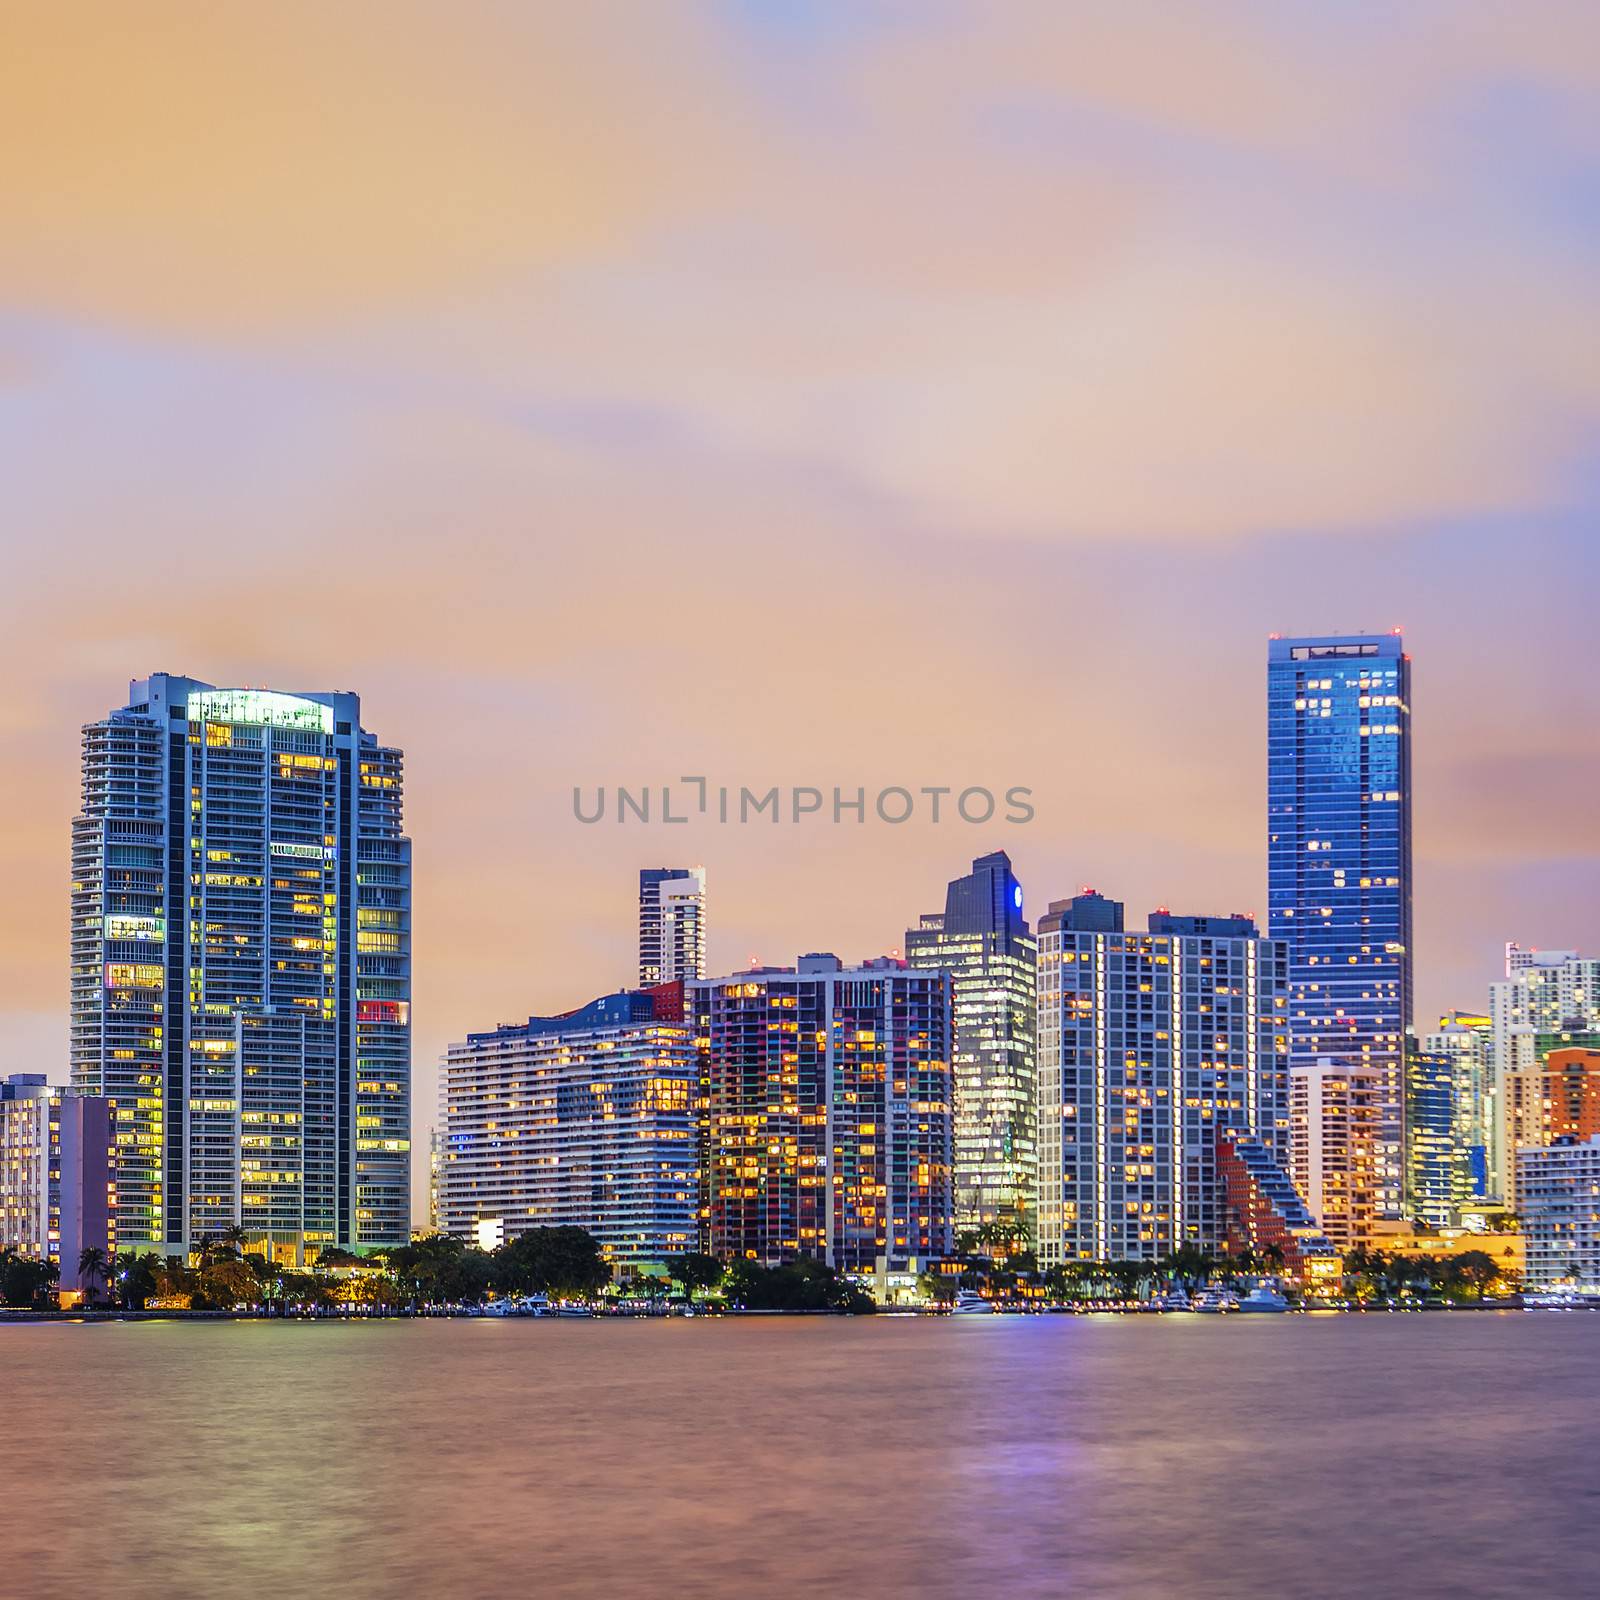 Miami Florida, summer sunset with colorful illuminated business and residential buildings and bridge on Biscayne Bay 